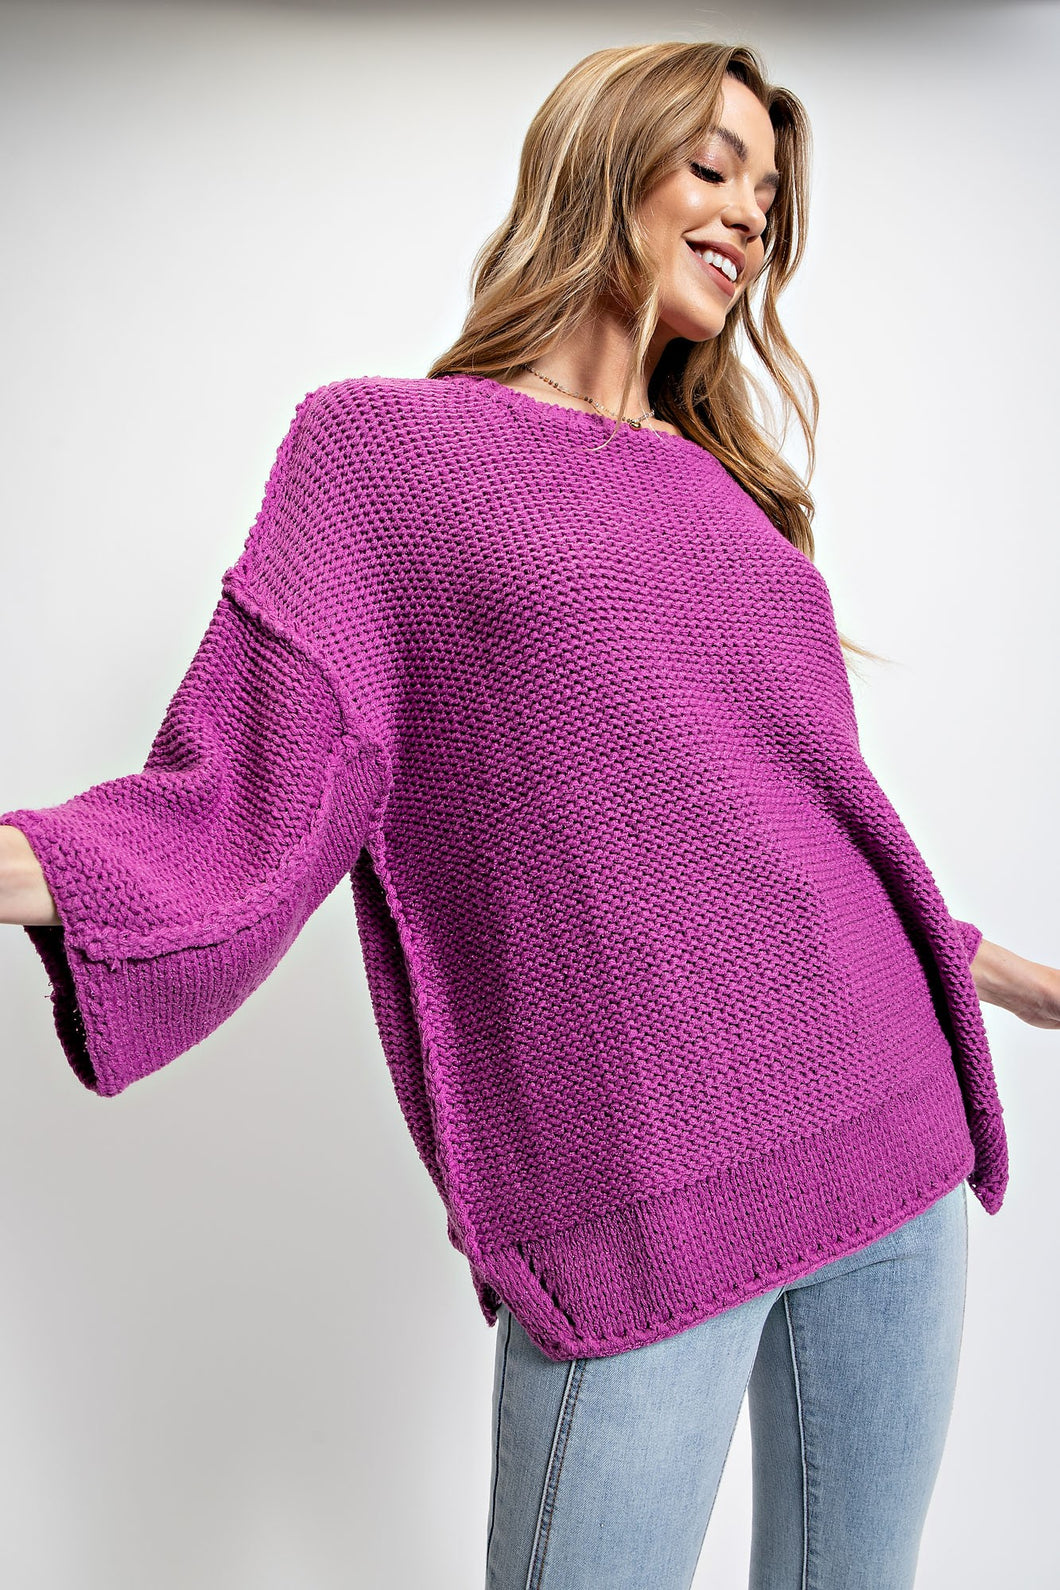 WIDE DOLMAN SLEEVE CHUNKY KNITTED BOXY SWEATER -CURVY